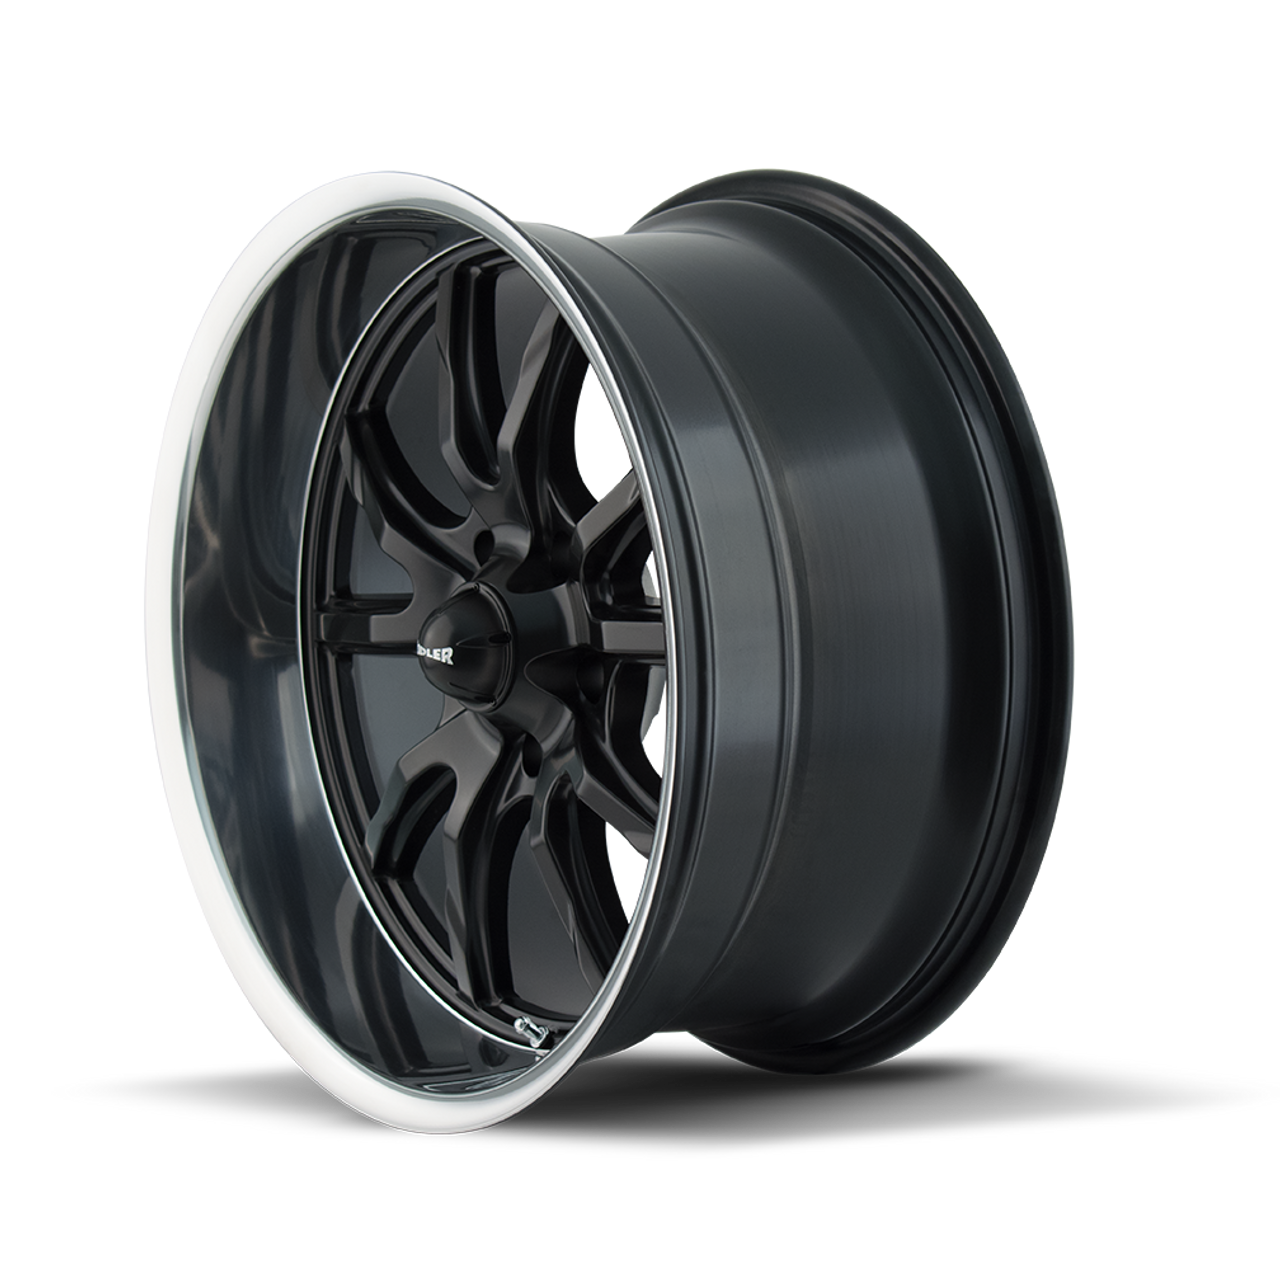 17" Ridler 650 17x7 Matte Black Polished Lip 5x4.5 Wheel 0mm For Ford Jeep Truck